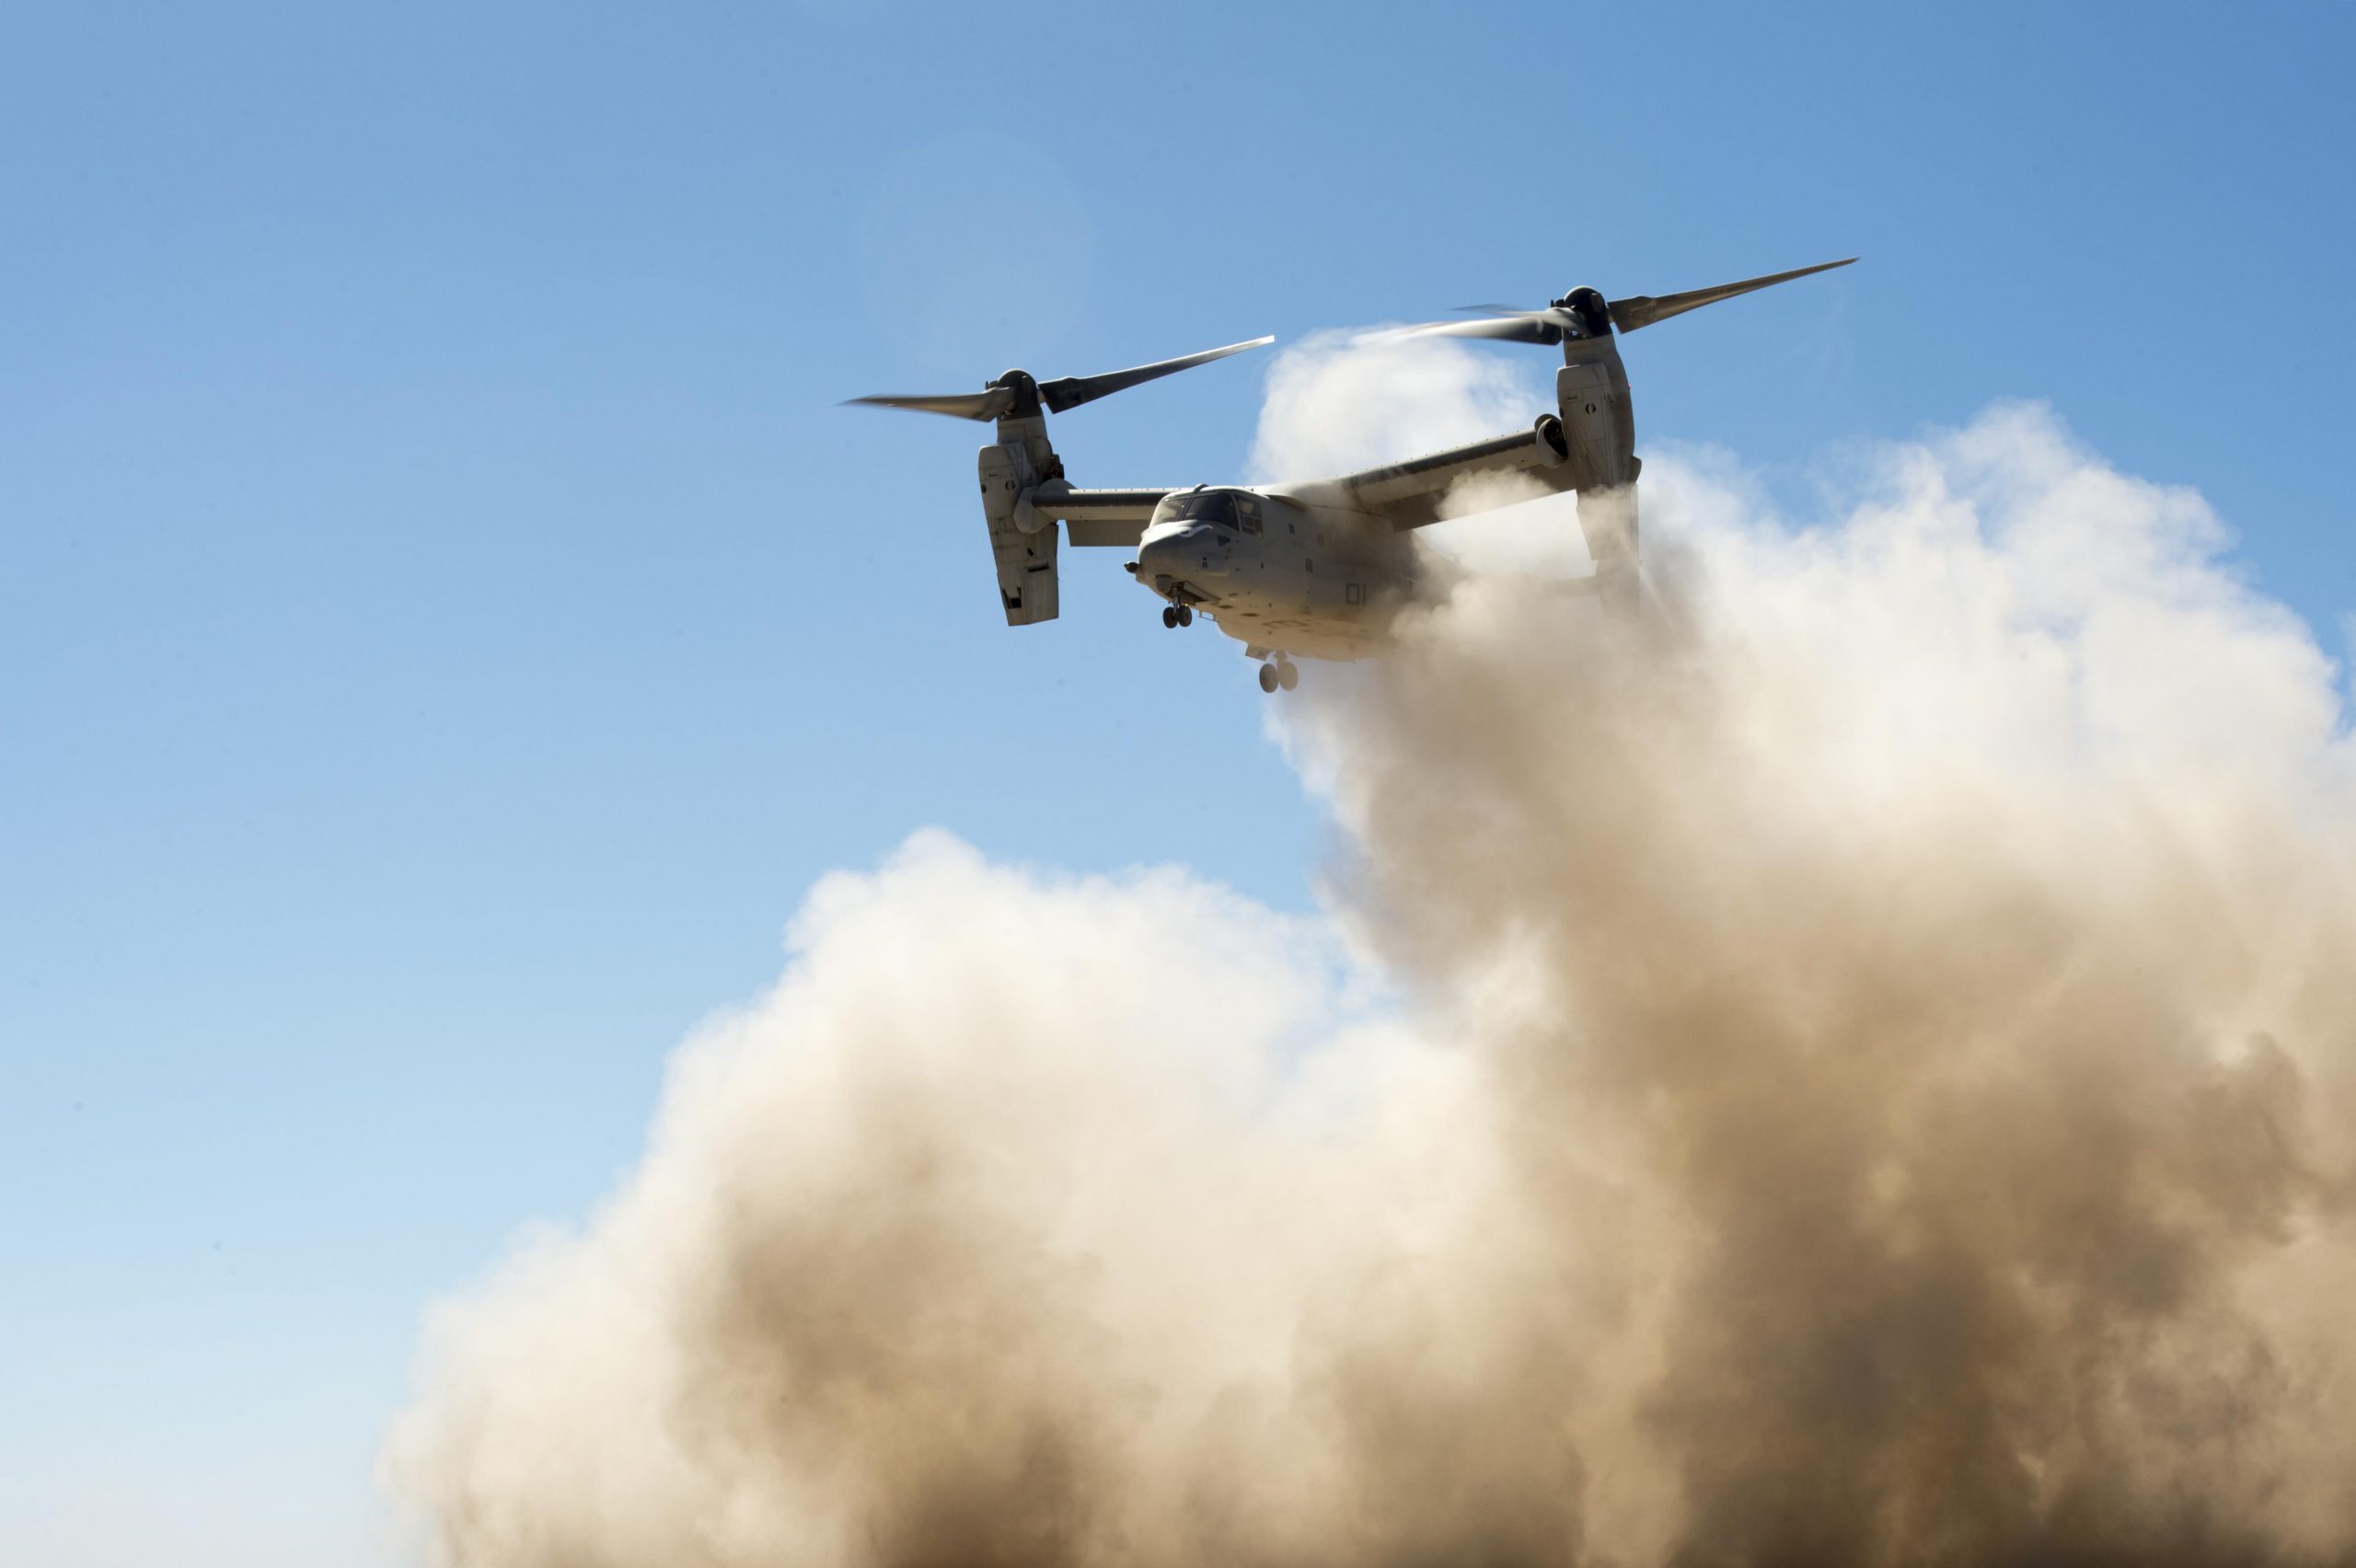 Service members from the Air Force, Army and Marine Corps participate in sustainment training at Grand Bara, Djibouti, Jan. 5, 2017. During the exercise, Air Force joint terminal attack controllers, along with soldiers from the 101st Infantry Battalion and Marines from the 11th Marine Expeditionary Unit conducted training utilizing MV-22 Osprey and F-16 Fighting Falcon aircraft. During a raid against the terrorist group al-Qaida in the Arabian Peninsula, Jan. 28, 2017, in Yemen, an Osprey hard-landed, injuring three service members and killing one. Air Force photo Tech. Sgt. Joshua J. Garcia. -